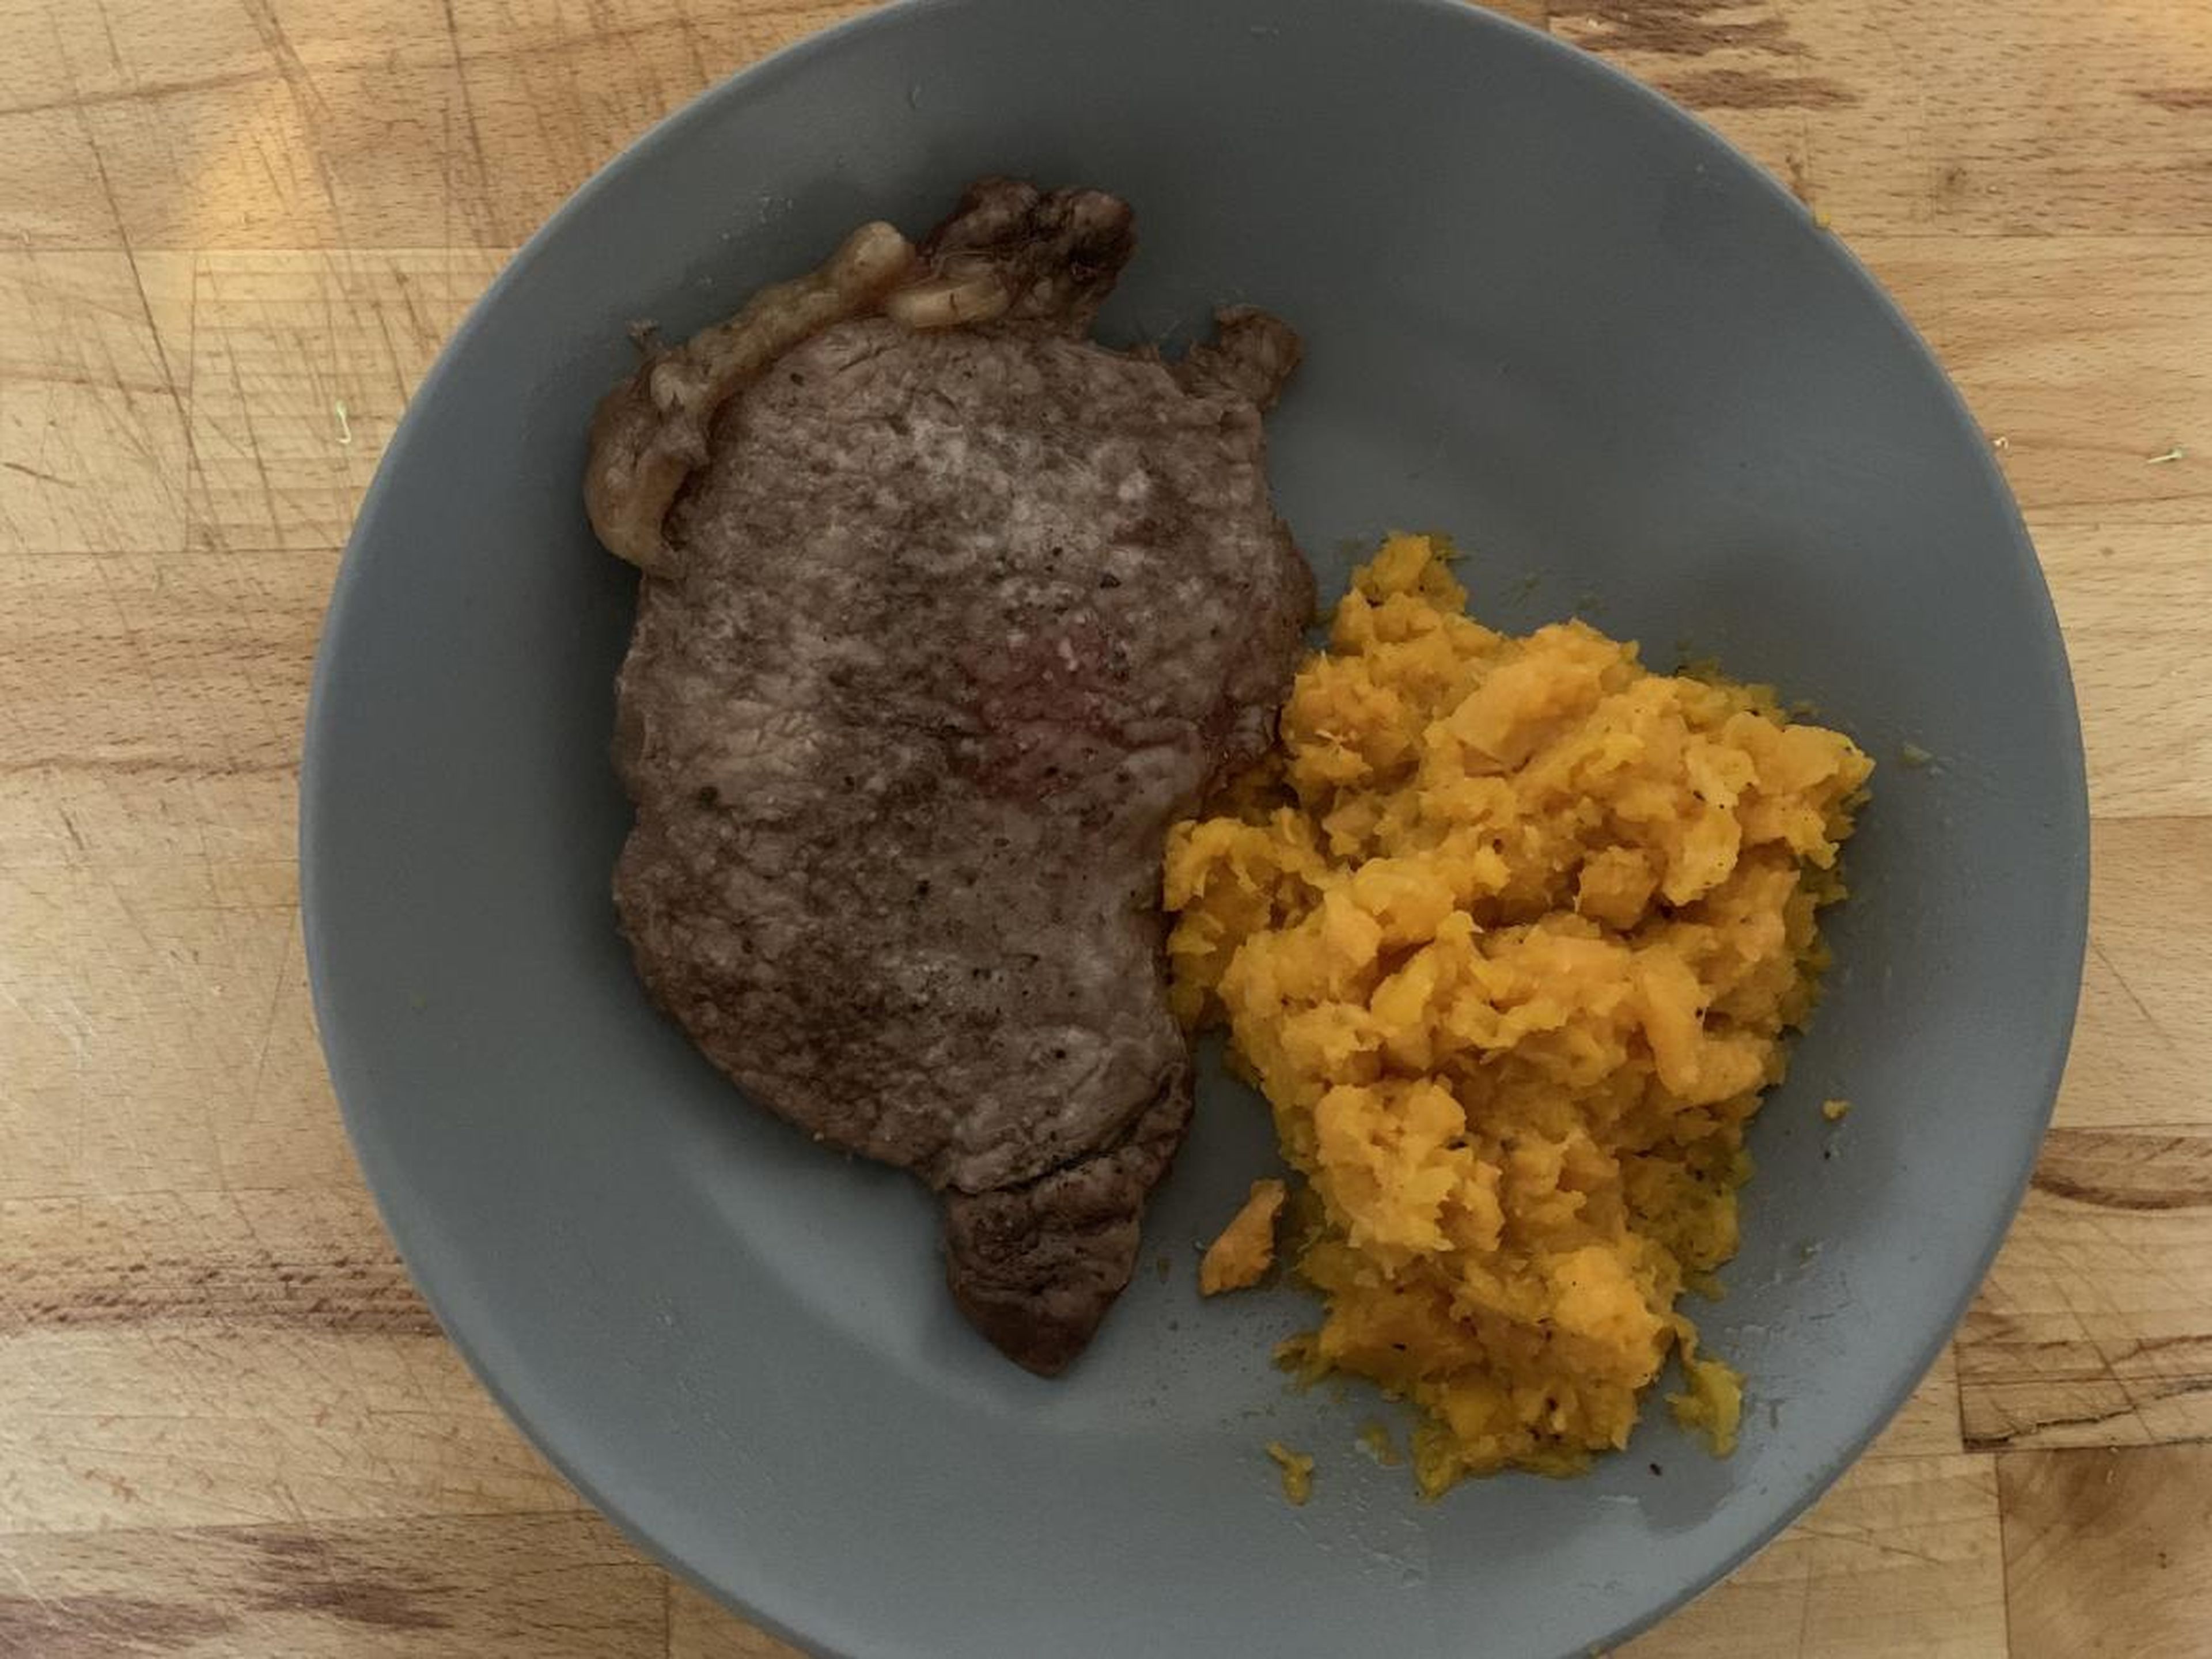 "I served my sad steak with butternut squash and sweet potato mash, as some form of compensation for what I was about to put into my body."